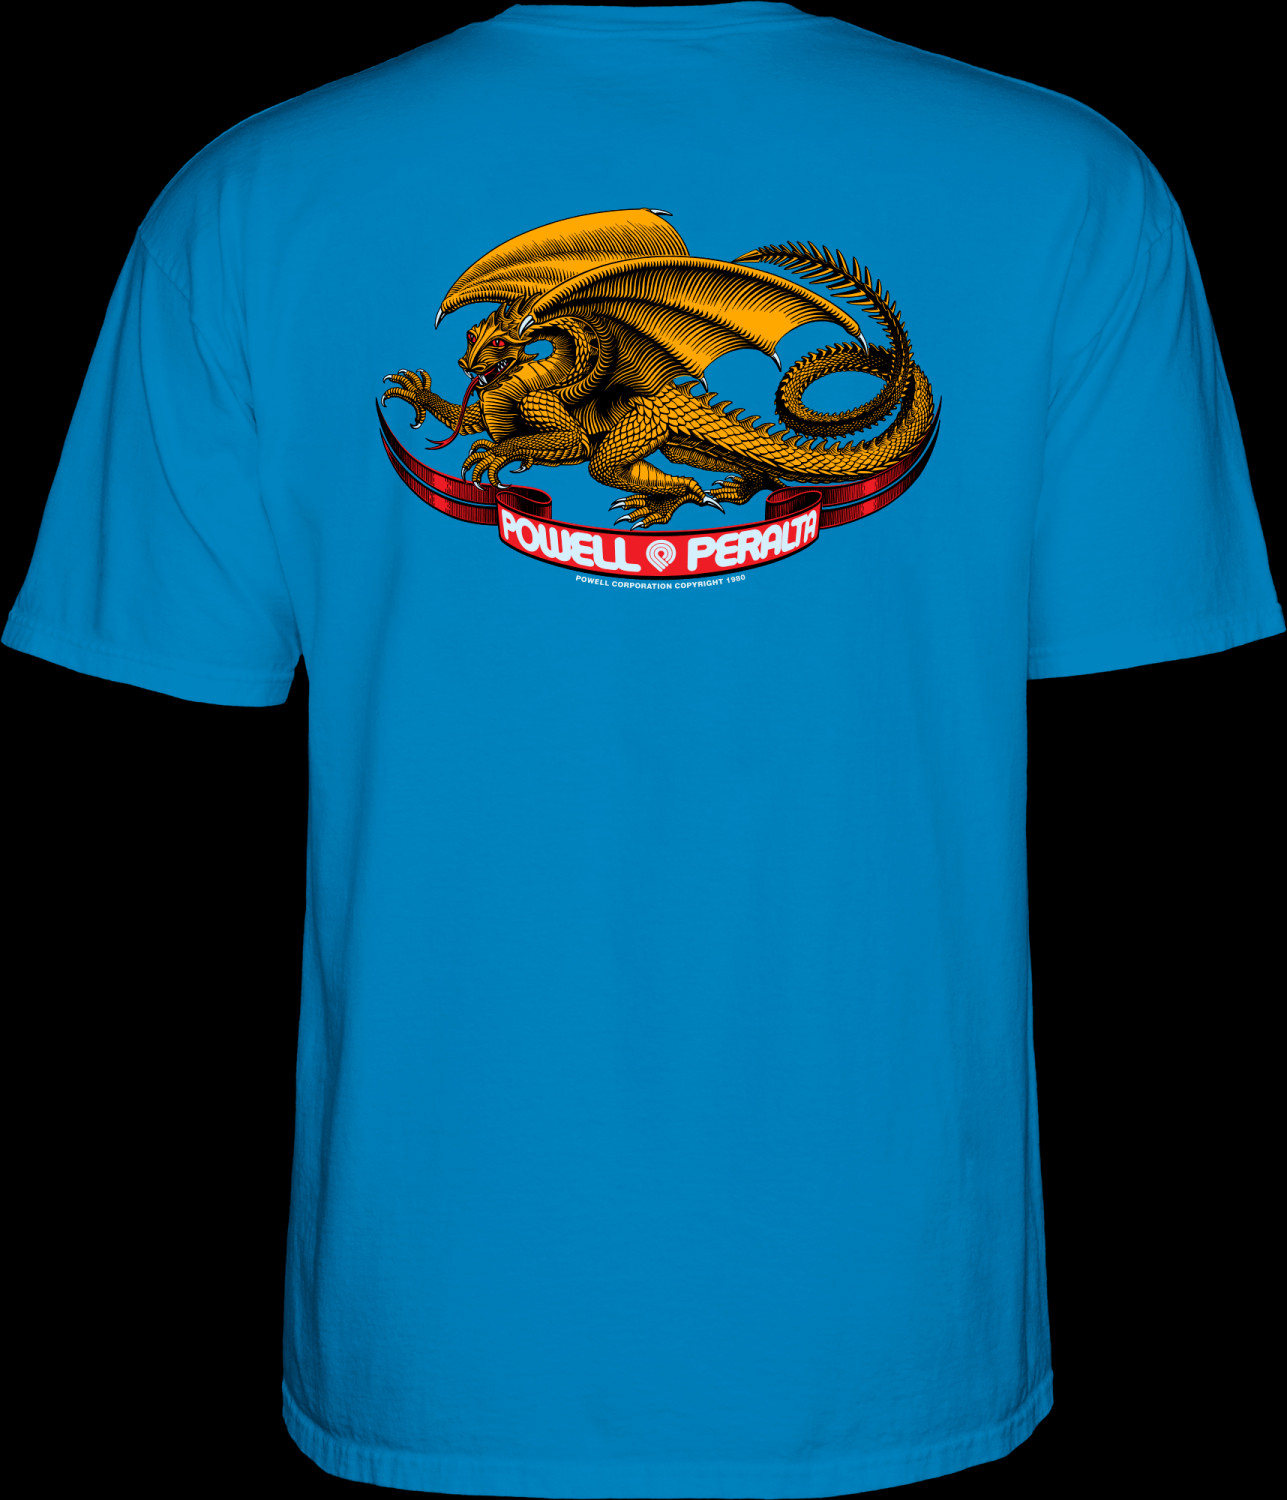 Powell Peralta Oval Dragon Youth T-Shirt Sapphire Blue Photo #3 - Photo ...